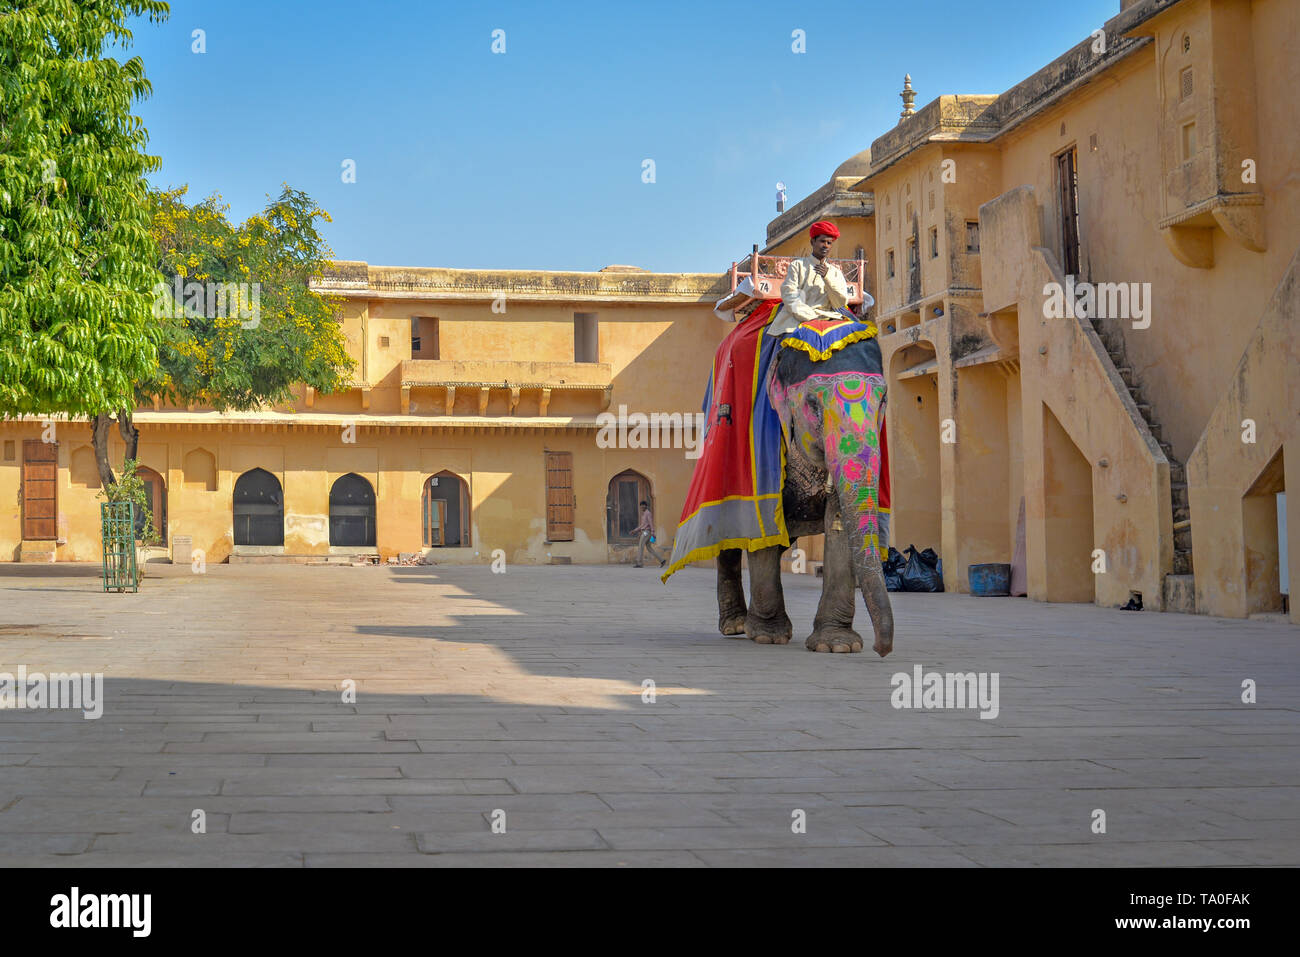 AMBER, INDIA - DECEMBER 5, 2015: Elephant keeper and its very elaborately adorned elephant at the Amber Fort Stock Photo